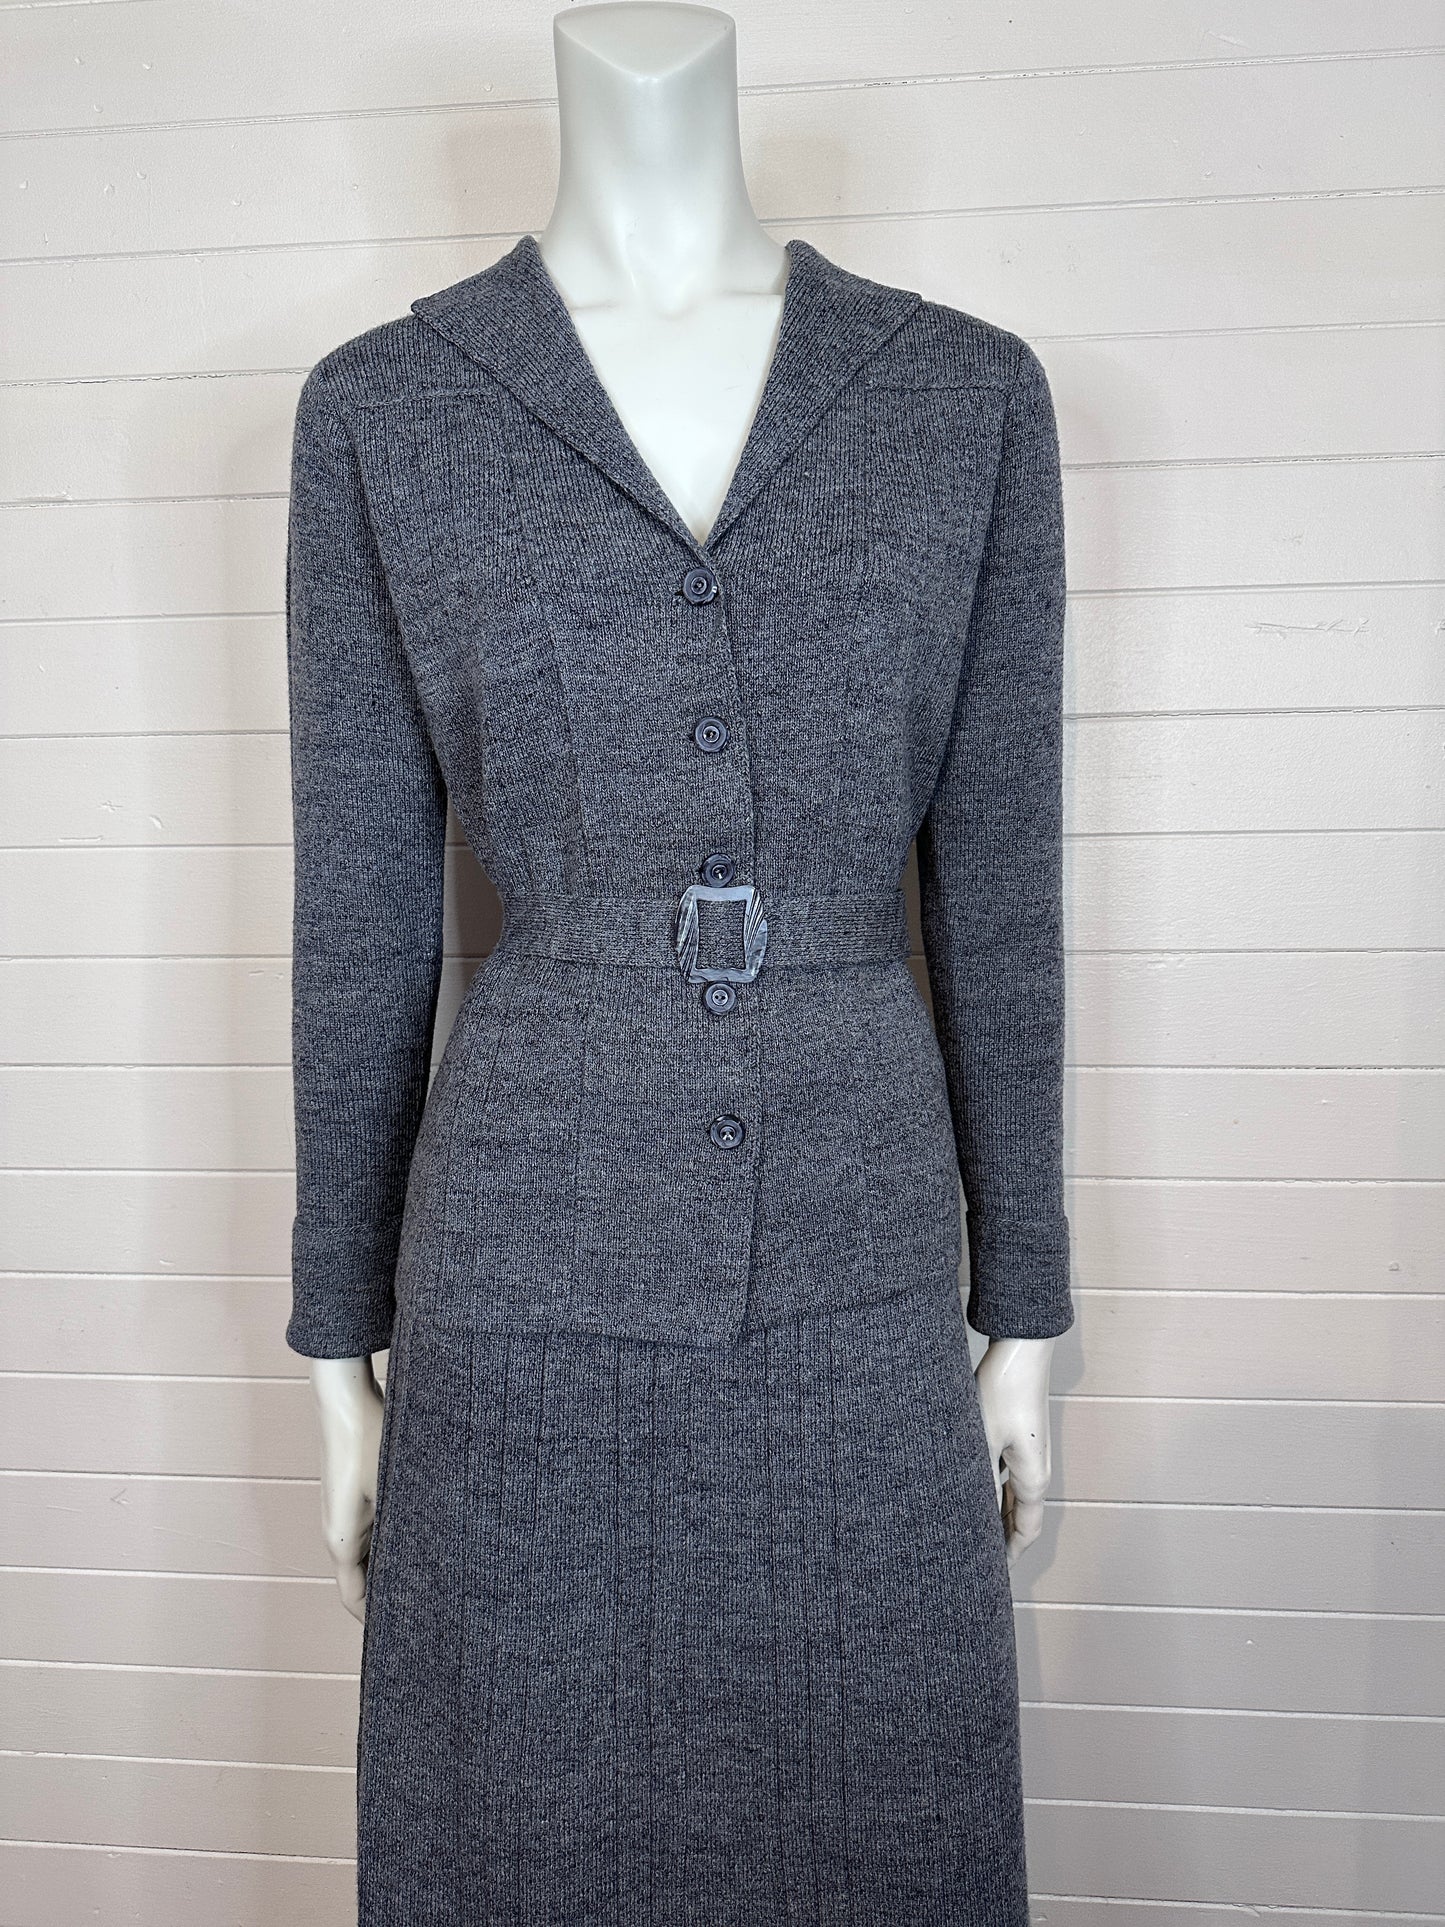 1930's Grey Knitwear Sweater and Skirt Dress Set - Mint Vintage Condition (S-M)